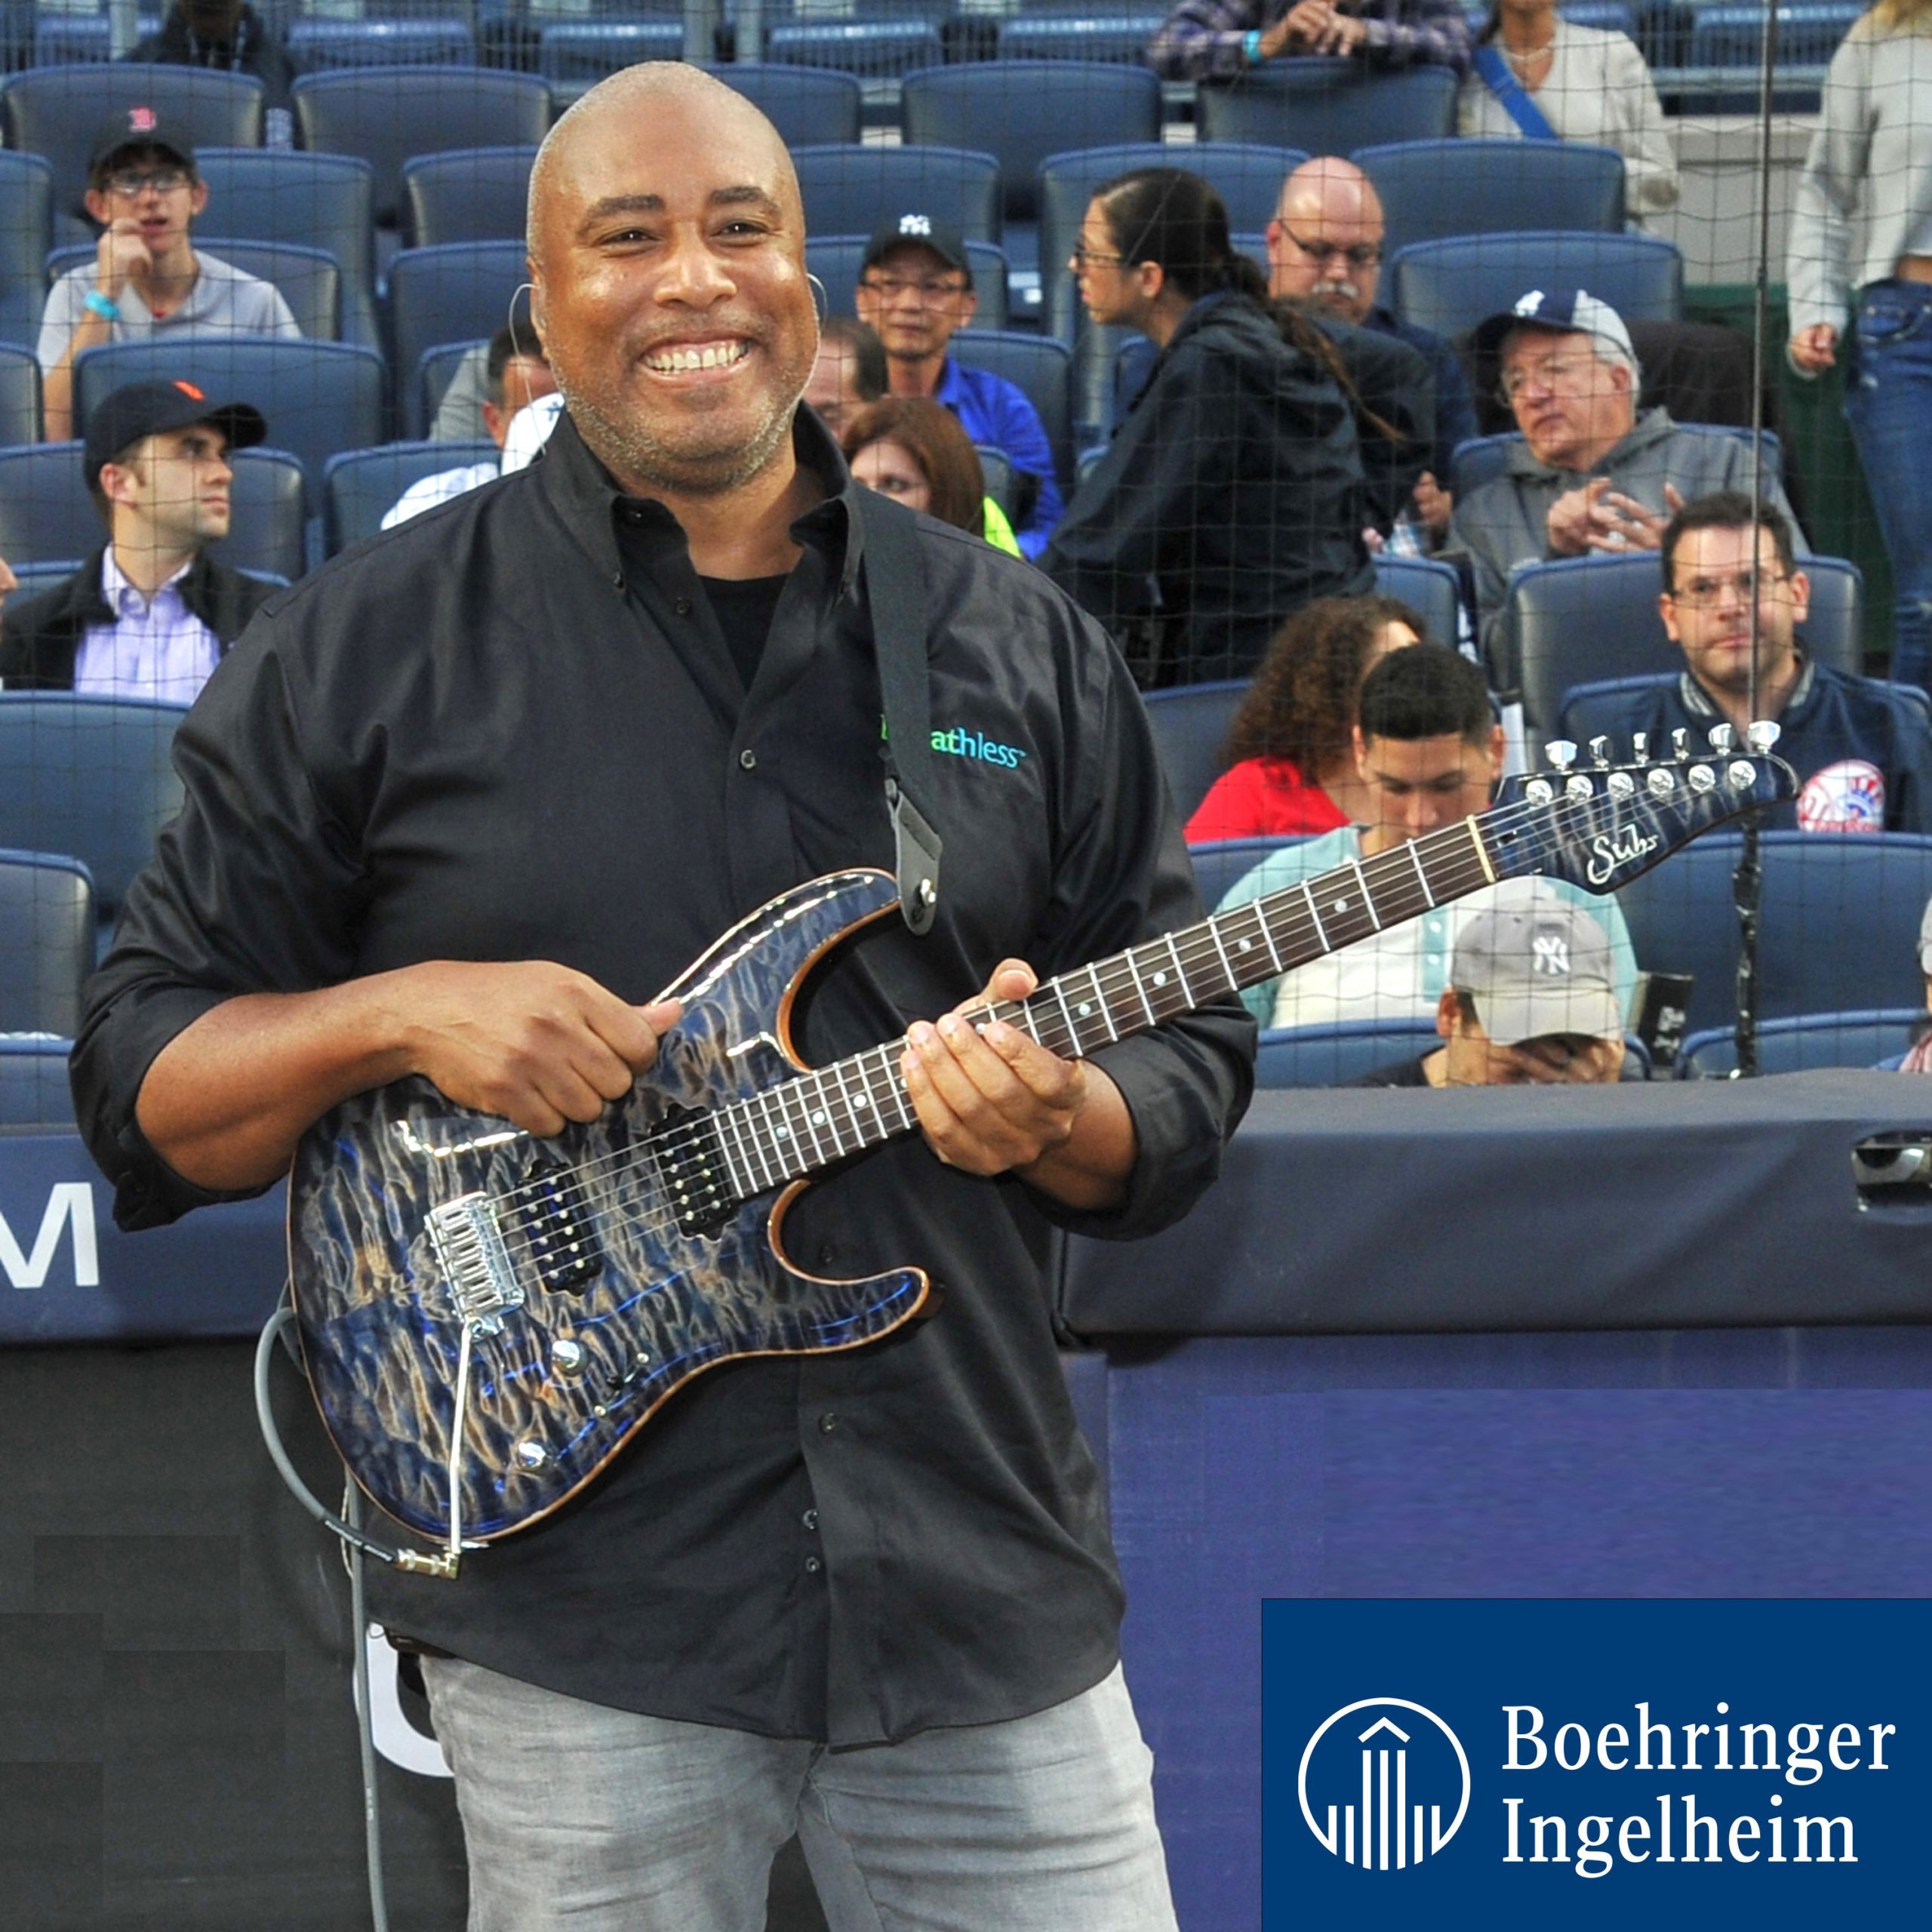 Bernie Williams: From Baseball to Music and Altruism